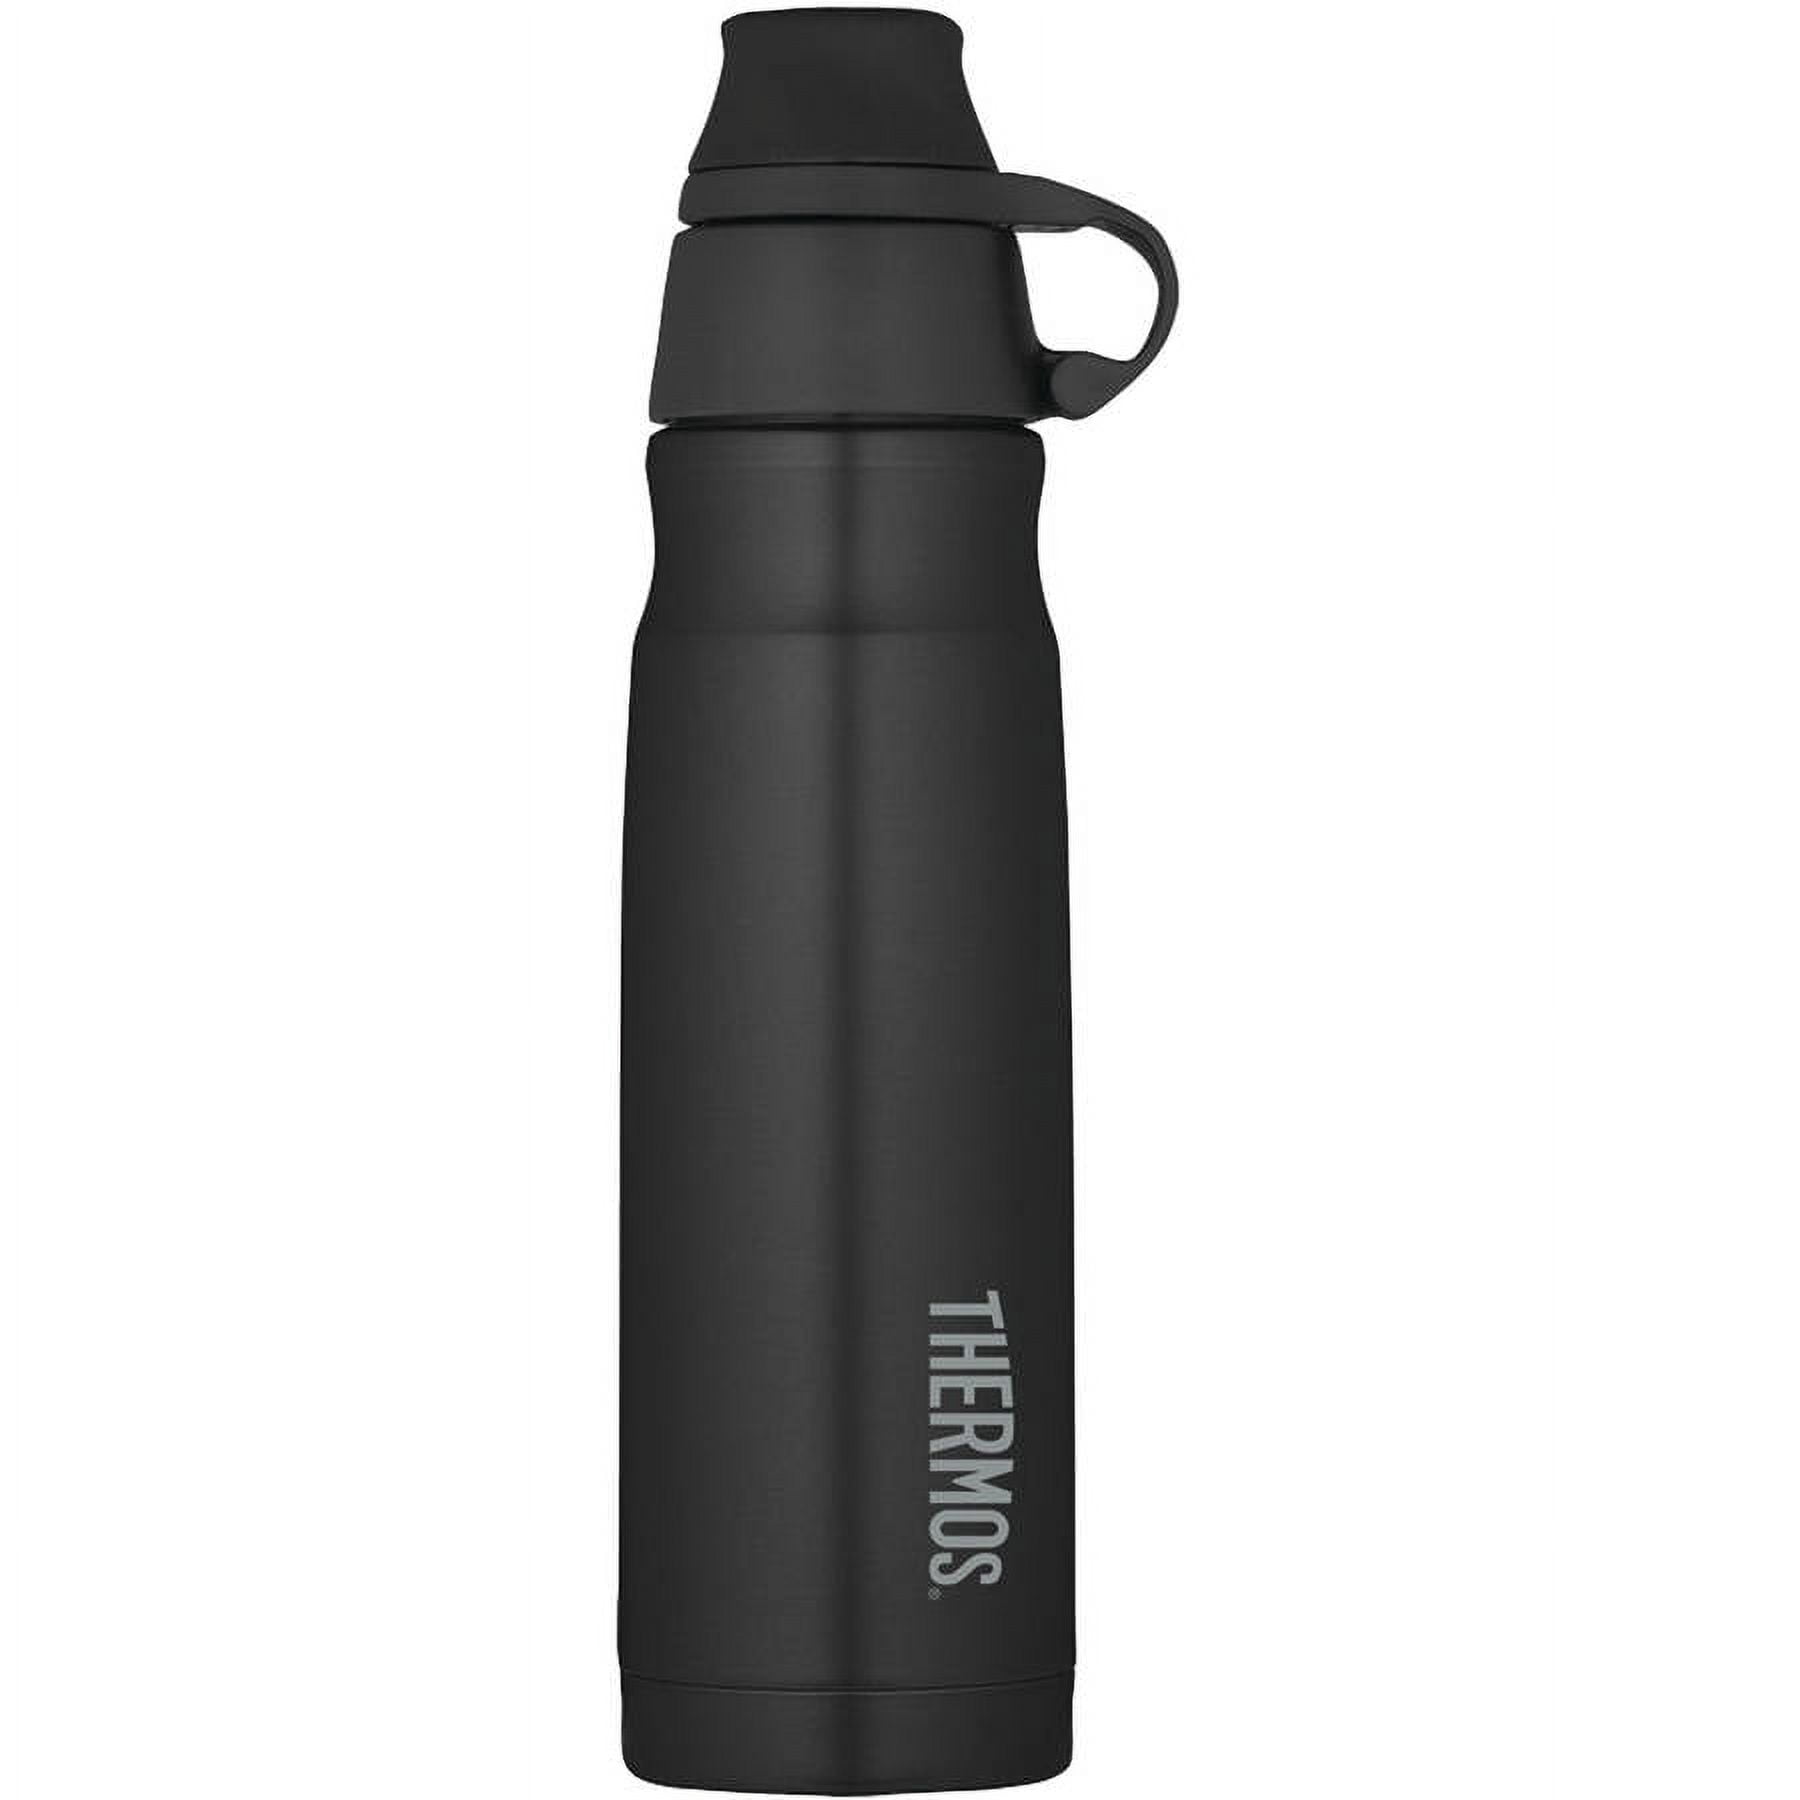 Thermos 64 oz. Foam Insulated Hydration Bottle - Black - ShopStyle Tumblers